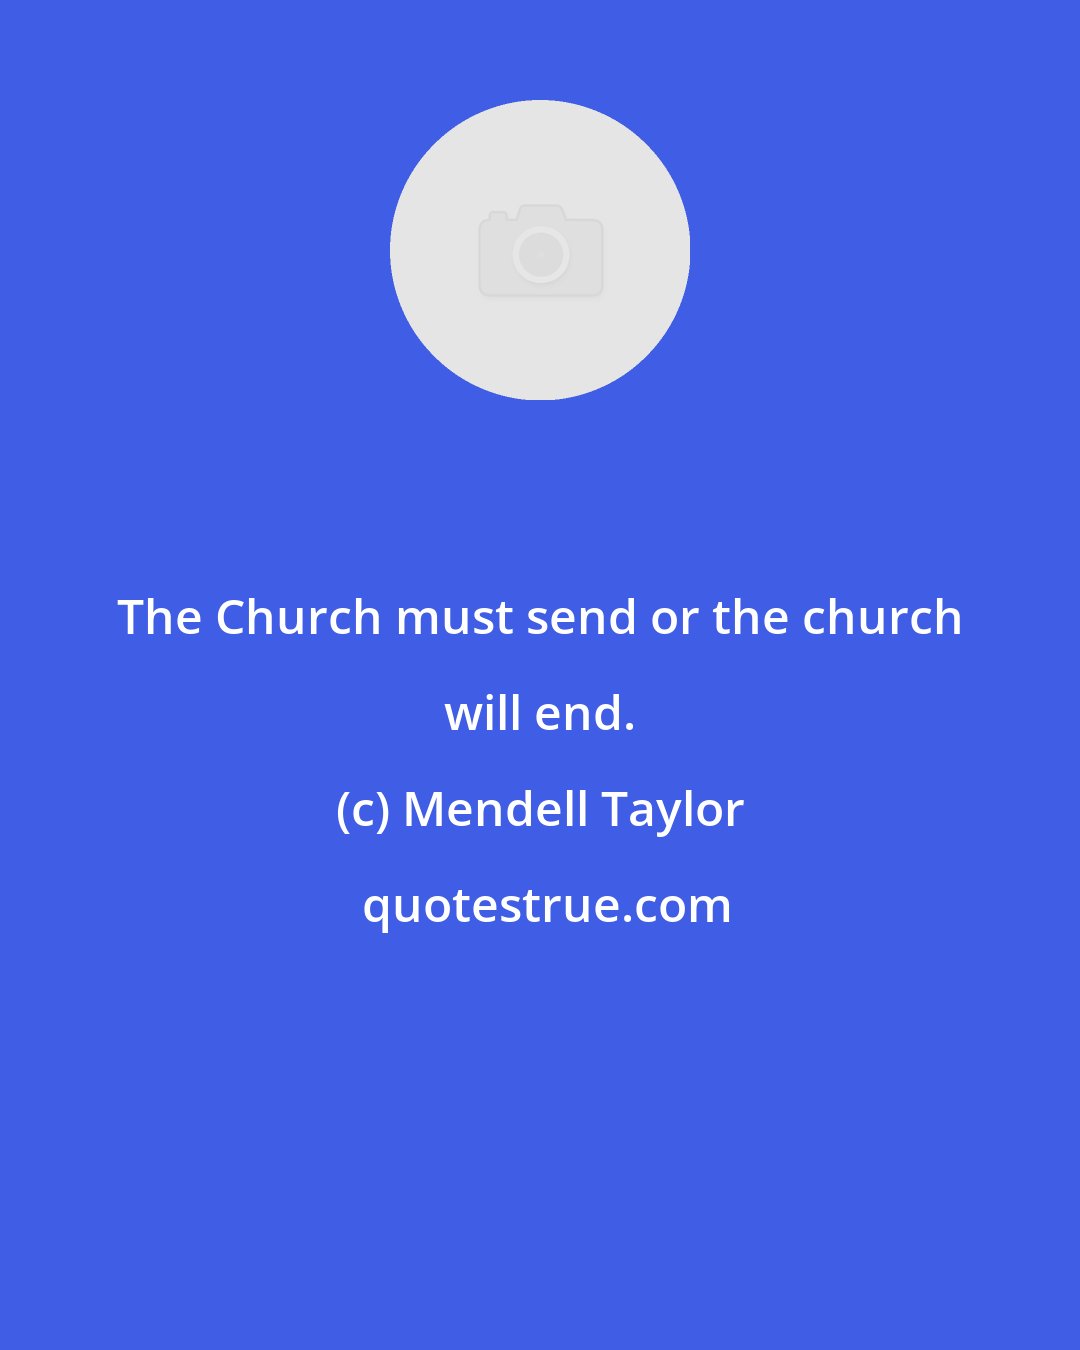 Mendell Taylor: The Church must send or the church will end.